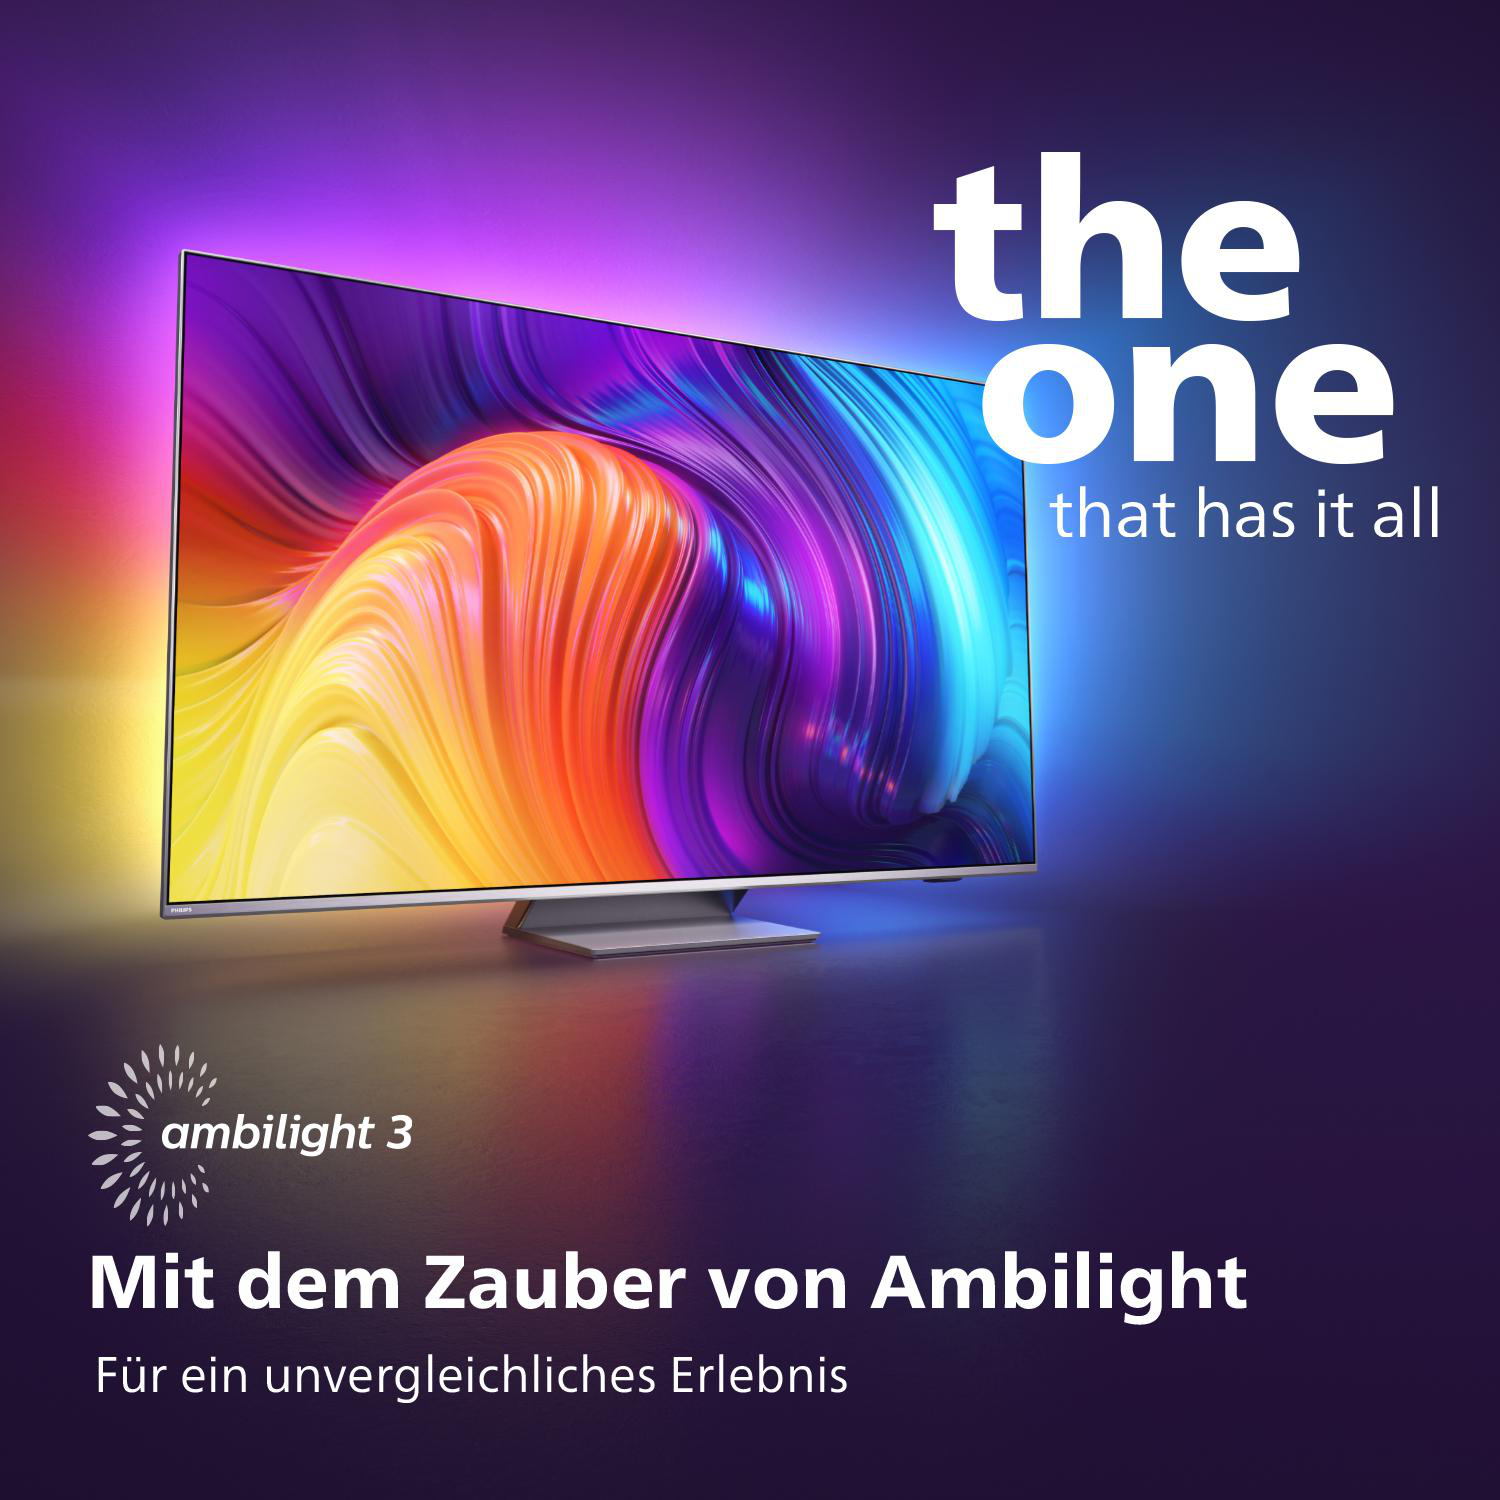 Zoll Ambilight, (Flat, LED 4K, cm, PHILIPS One TV The UHD / (R)) SMART TV, 164 65 65PUS8837/12 TV™ 11 Android